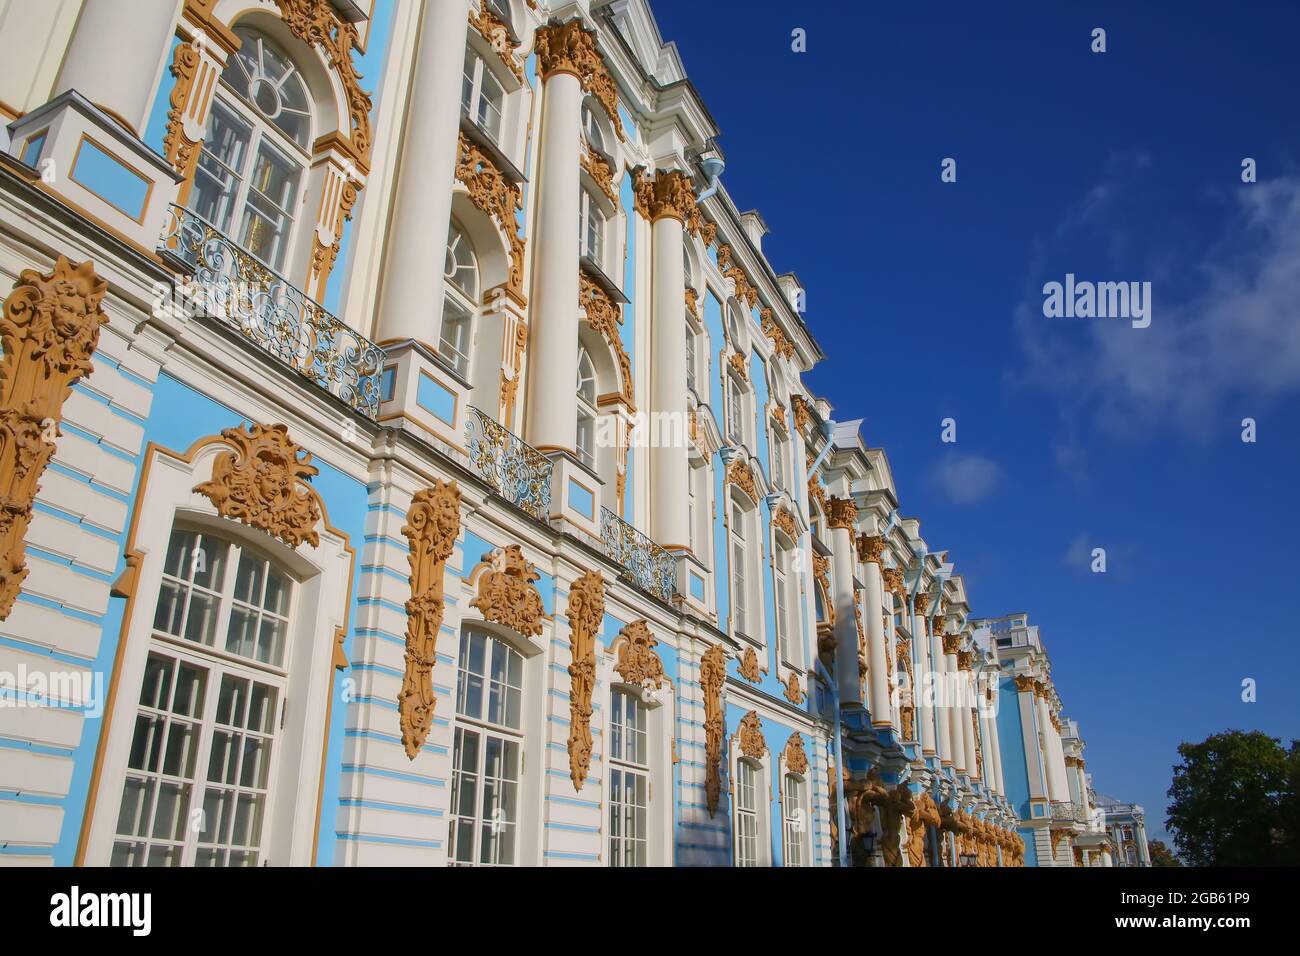 View of the beautiful exterior of Catherine Palace. Catherines Palace is a Rococo palace in Tsarskoye Selo Pushkin, St. Petersburg, Russia. Stock Photo